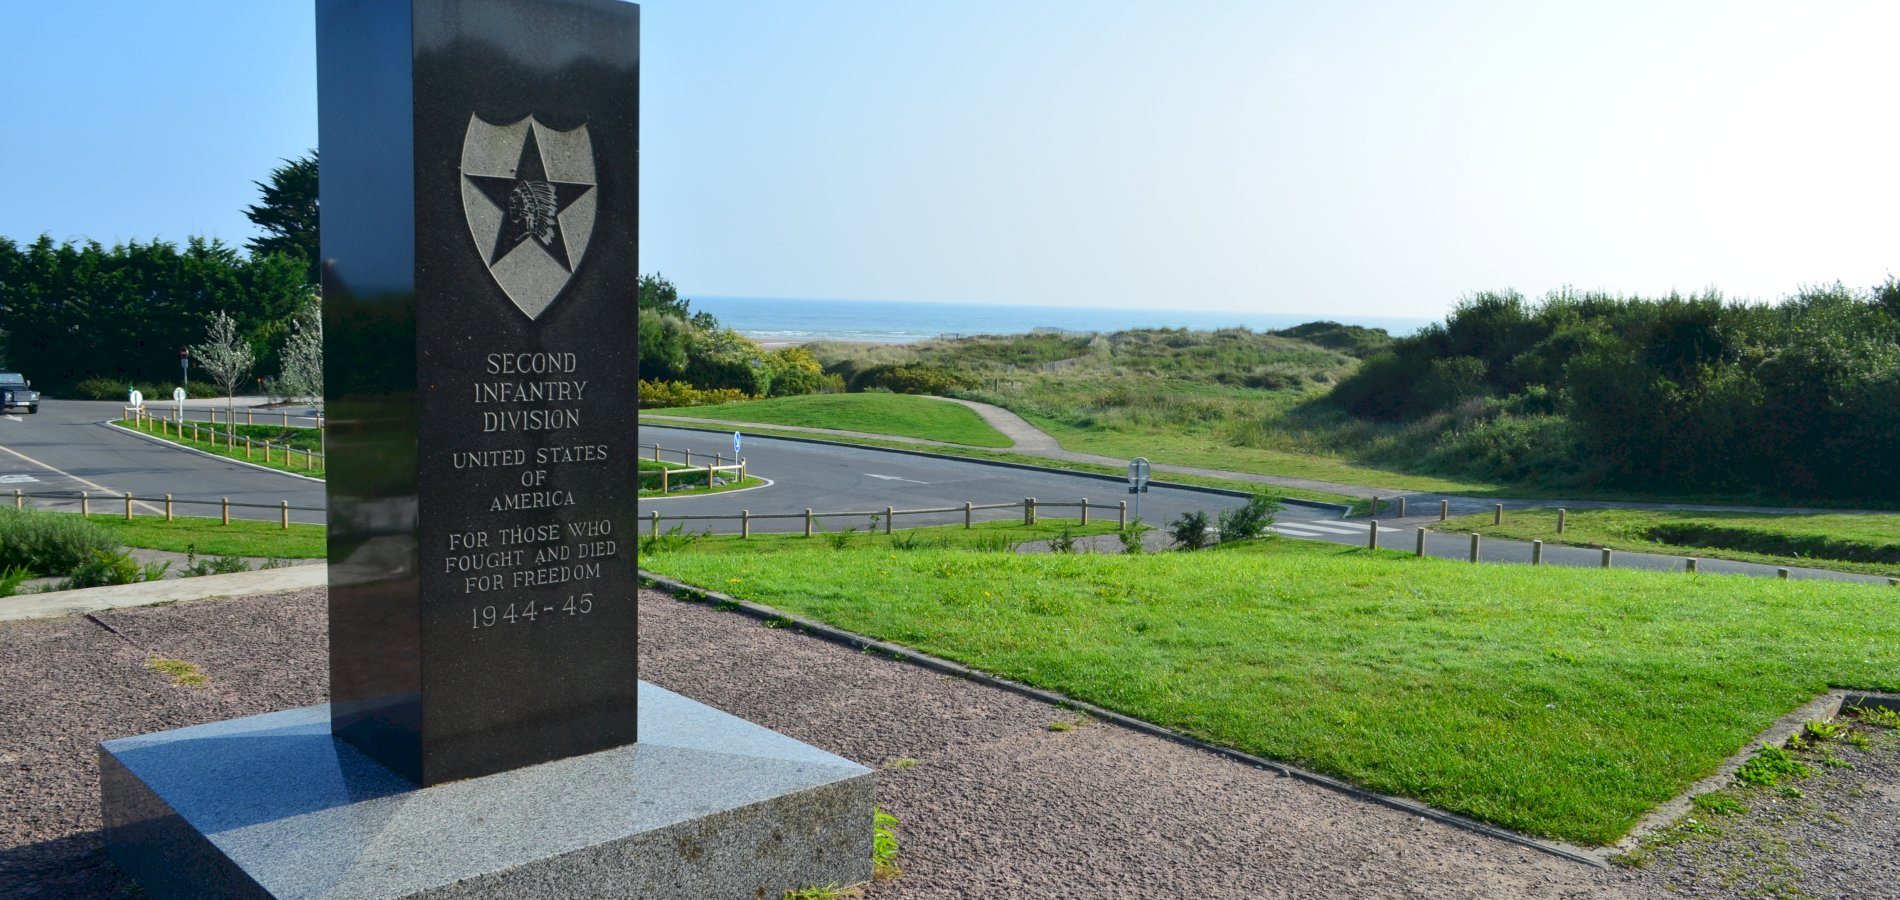 Ophorus Tours - A Private Shore Excursion From Cherbourg to D-DAY Normandy Beaches